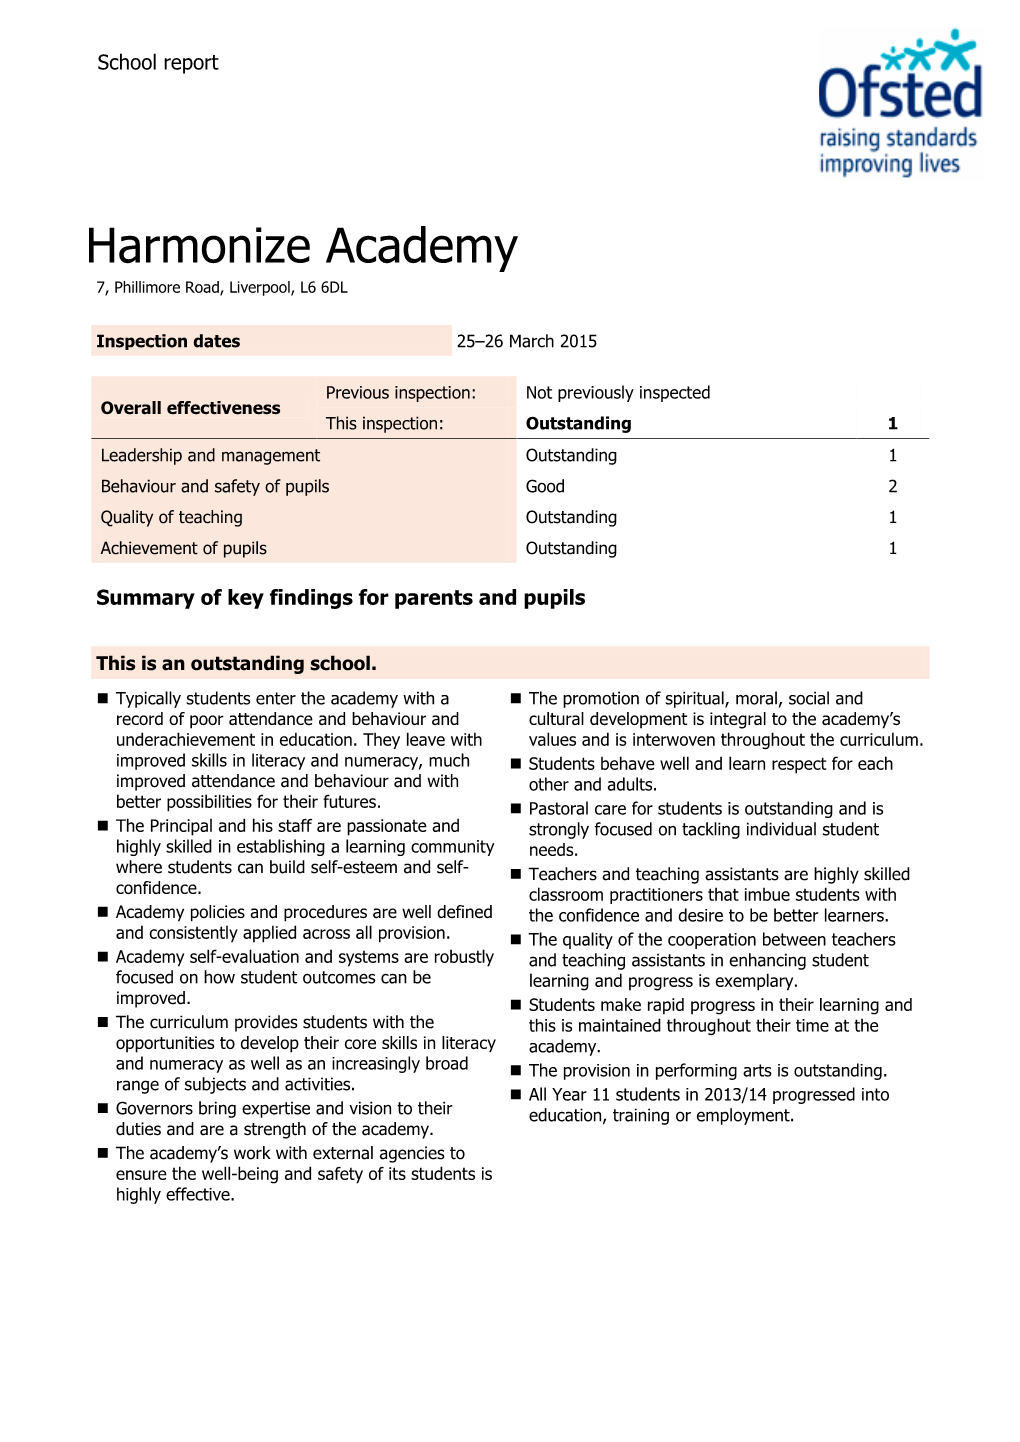 Harmonize Academy Ofsted Report March 2015